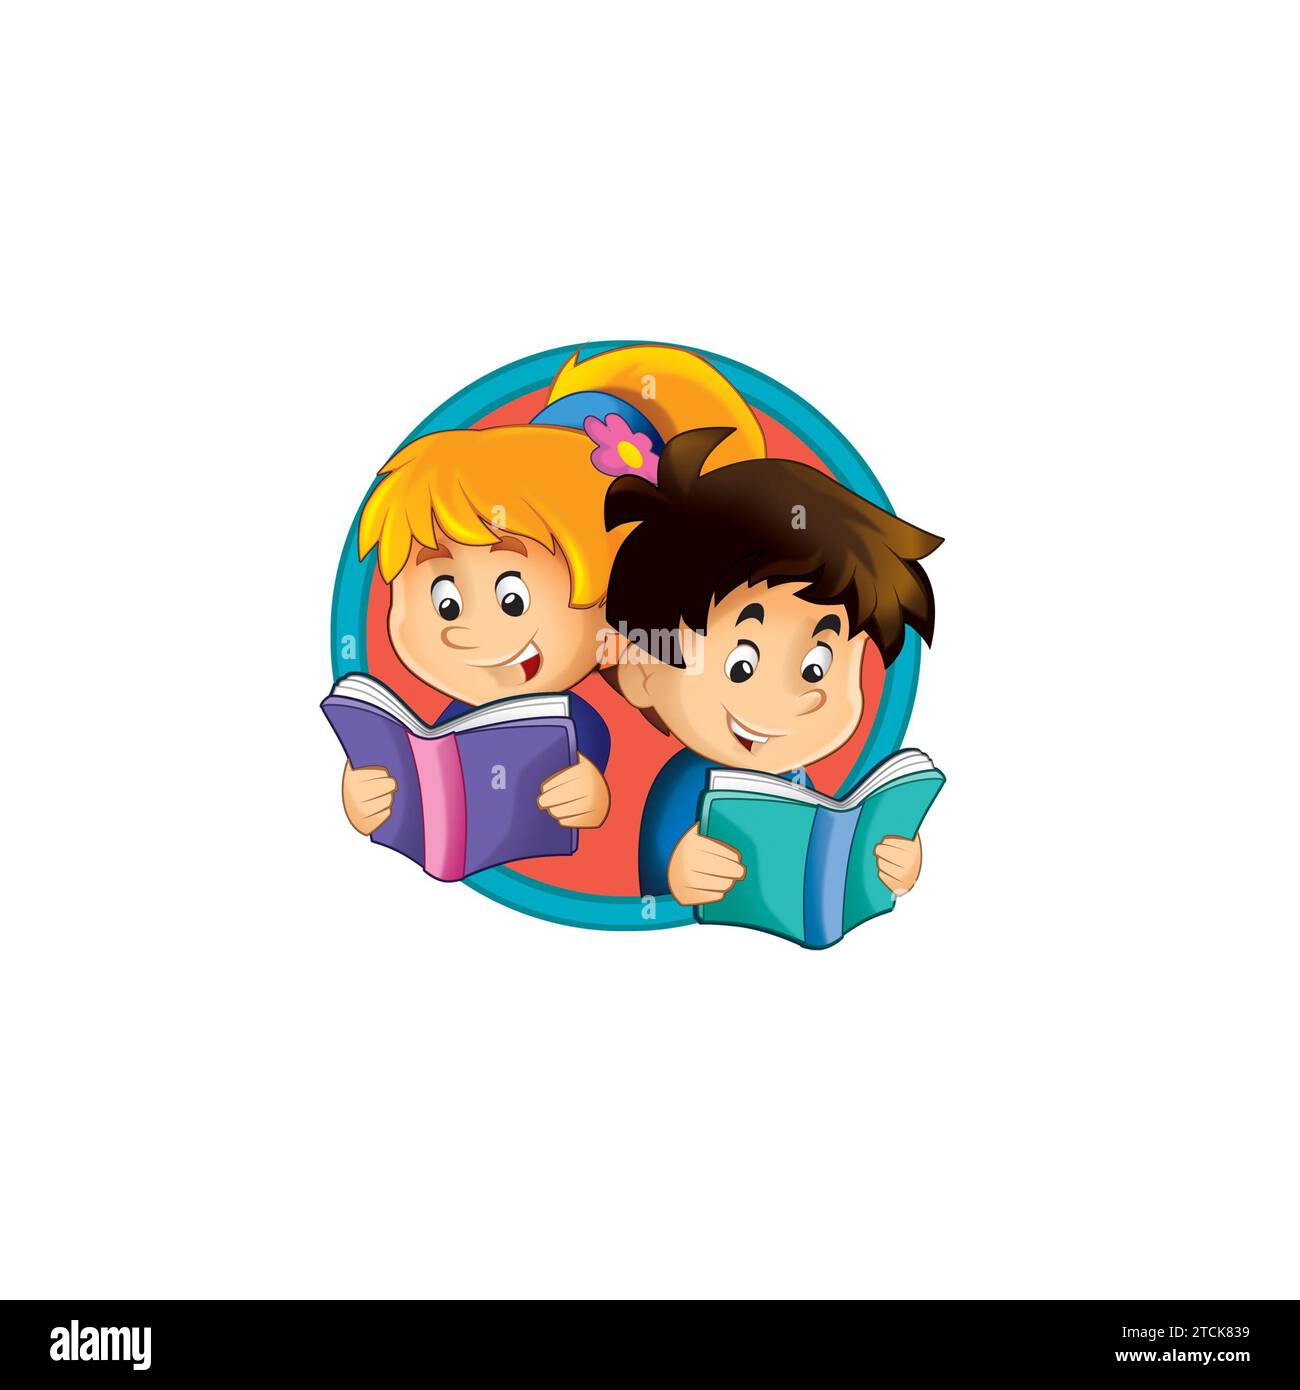 cartoon scene with young child with some childhood activity illustration on white background as button scene for kids Stock Photo